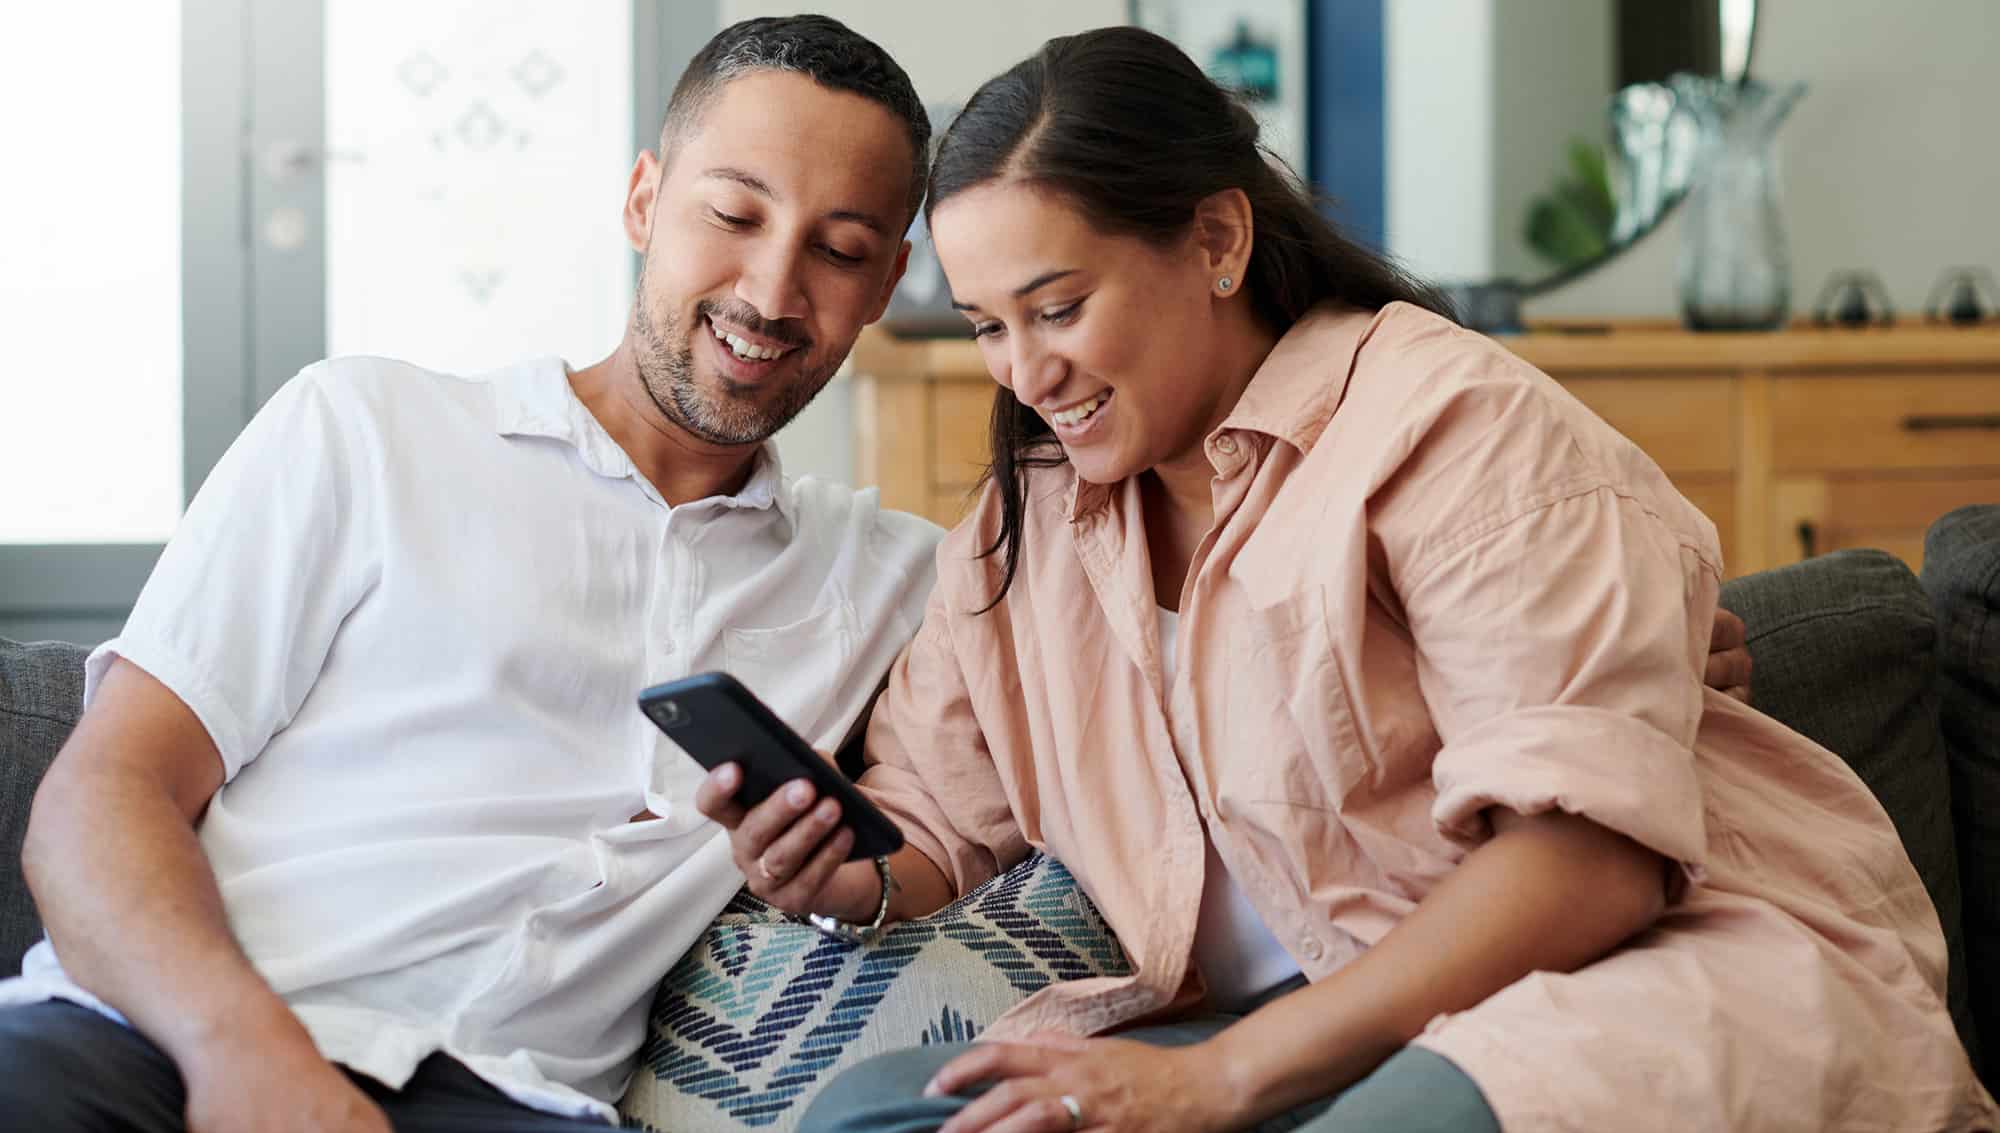 Couple on couch with cell phone